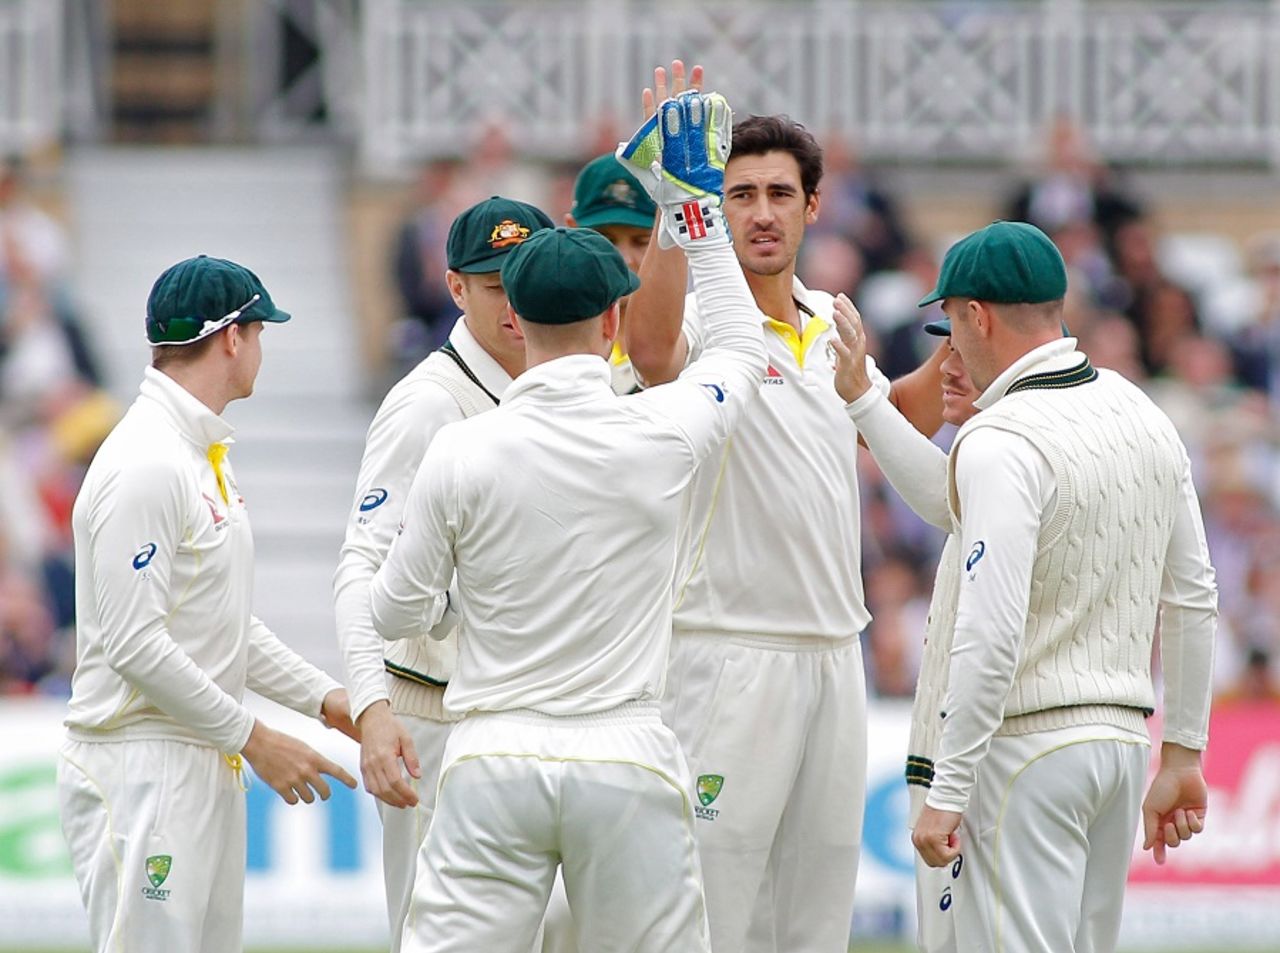 Mitchell Starc is mobbed by his team-mates, England v Australia, 4th Investec Test, Trent Bridge, 2nd day, August 7, 2015